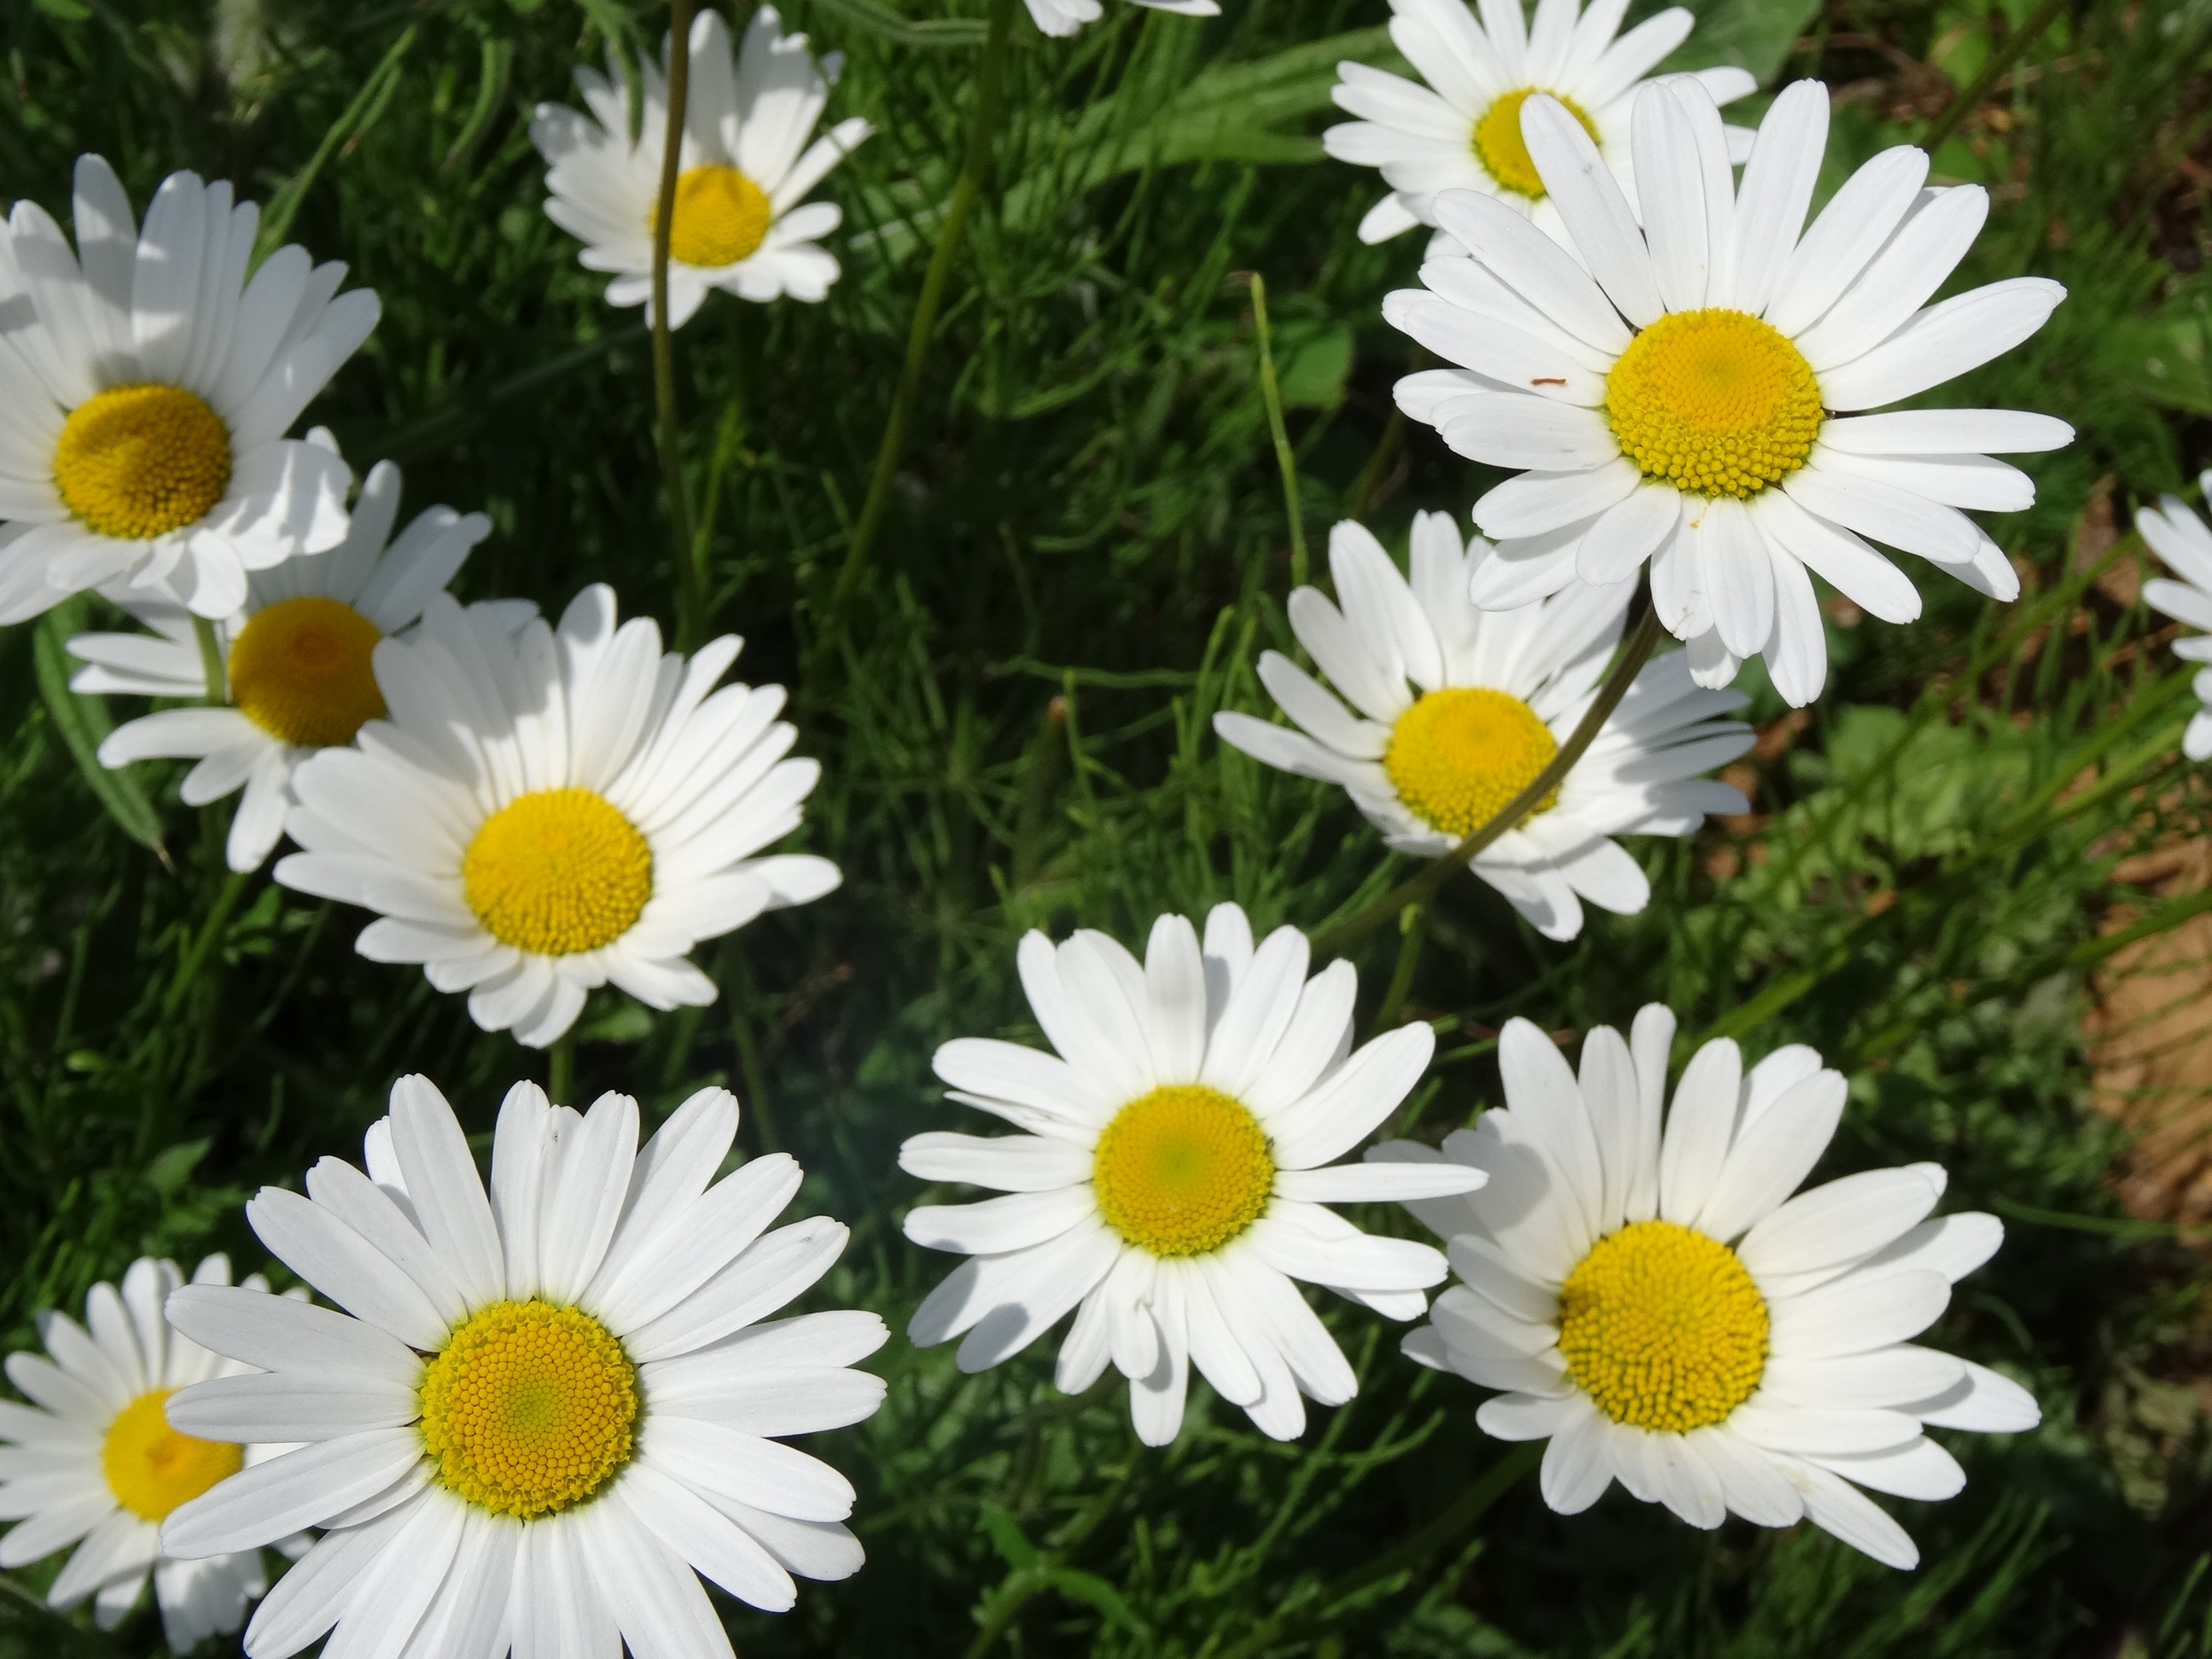 Daisies flowers in summertime free image download